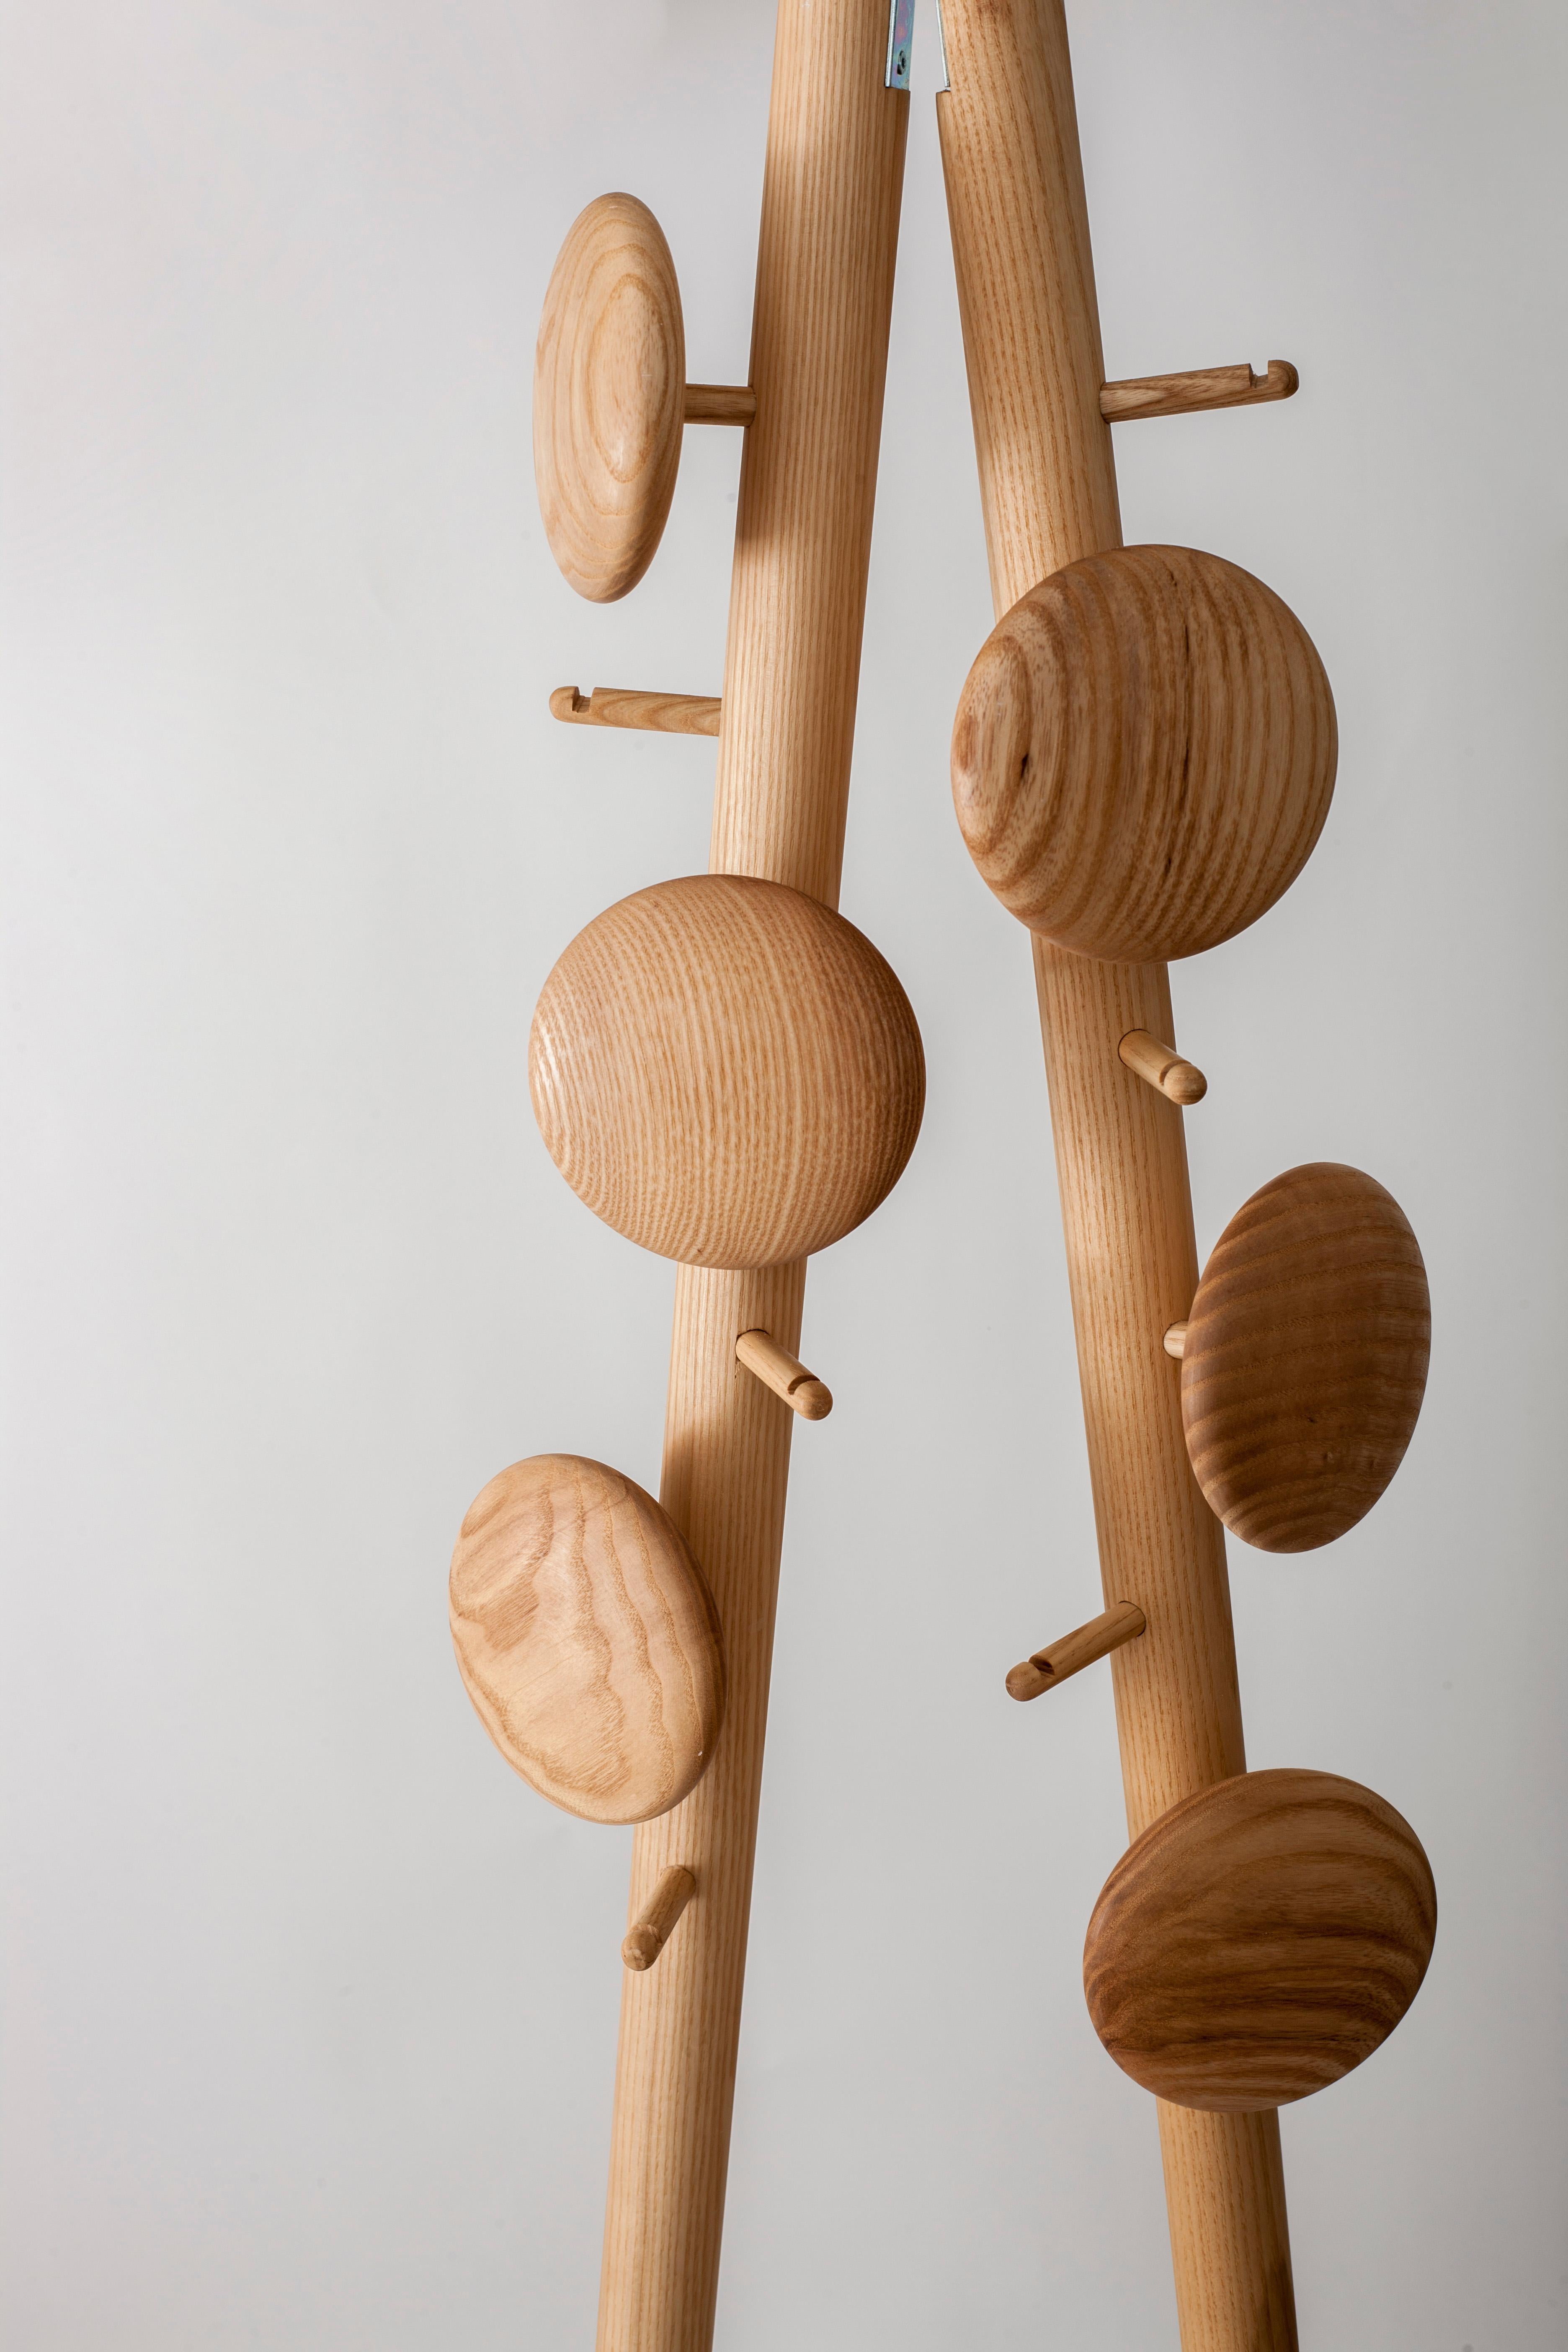 Johnny Stecchino Coat Rack Ashwood Design Studio Ventotto In New Condition For Sale In Paris, FR